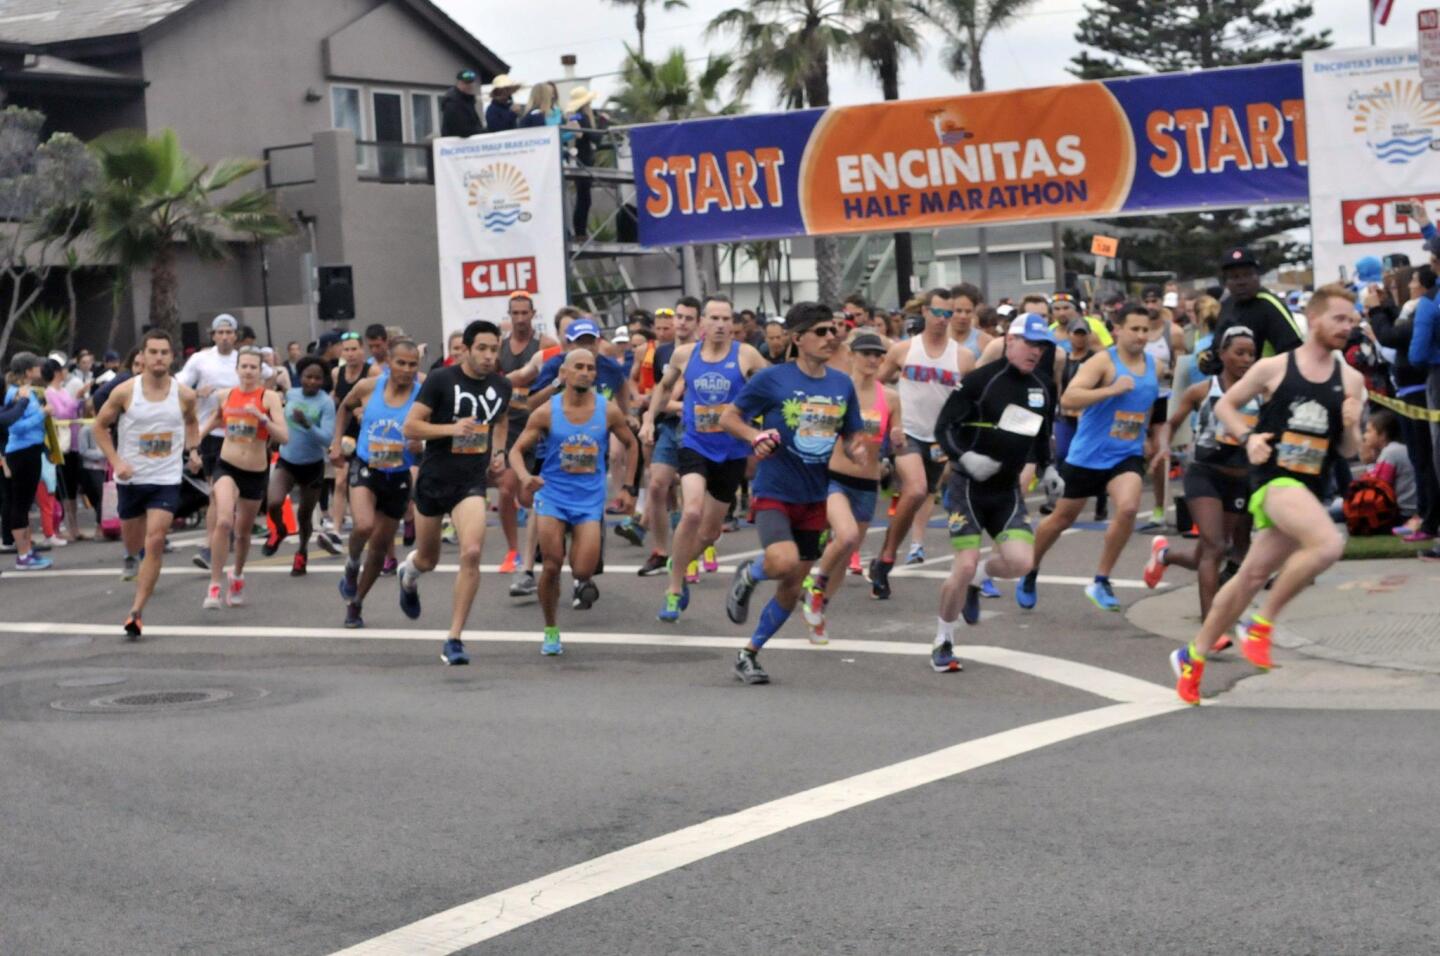 The inaugural Encinitas Half Marathon was held March 26. (Above) Elite runners at the start of the race.